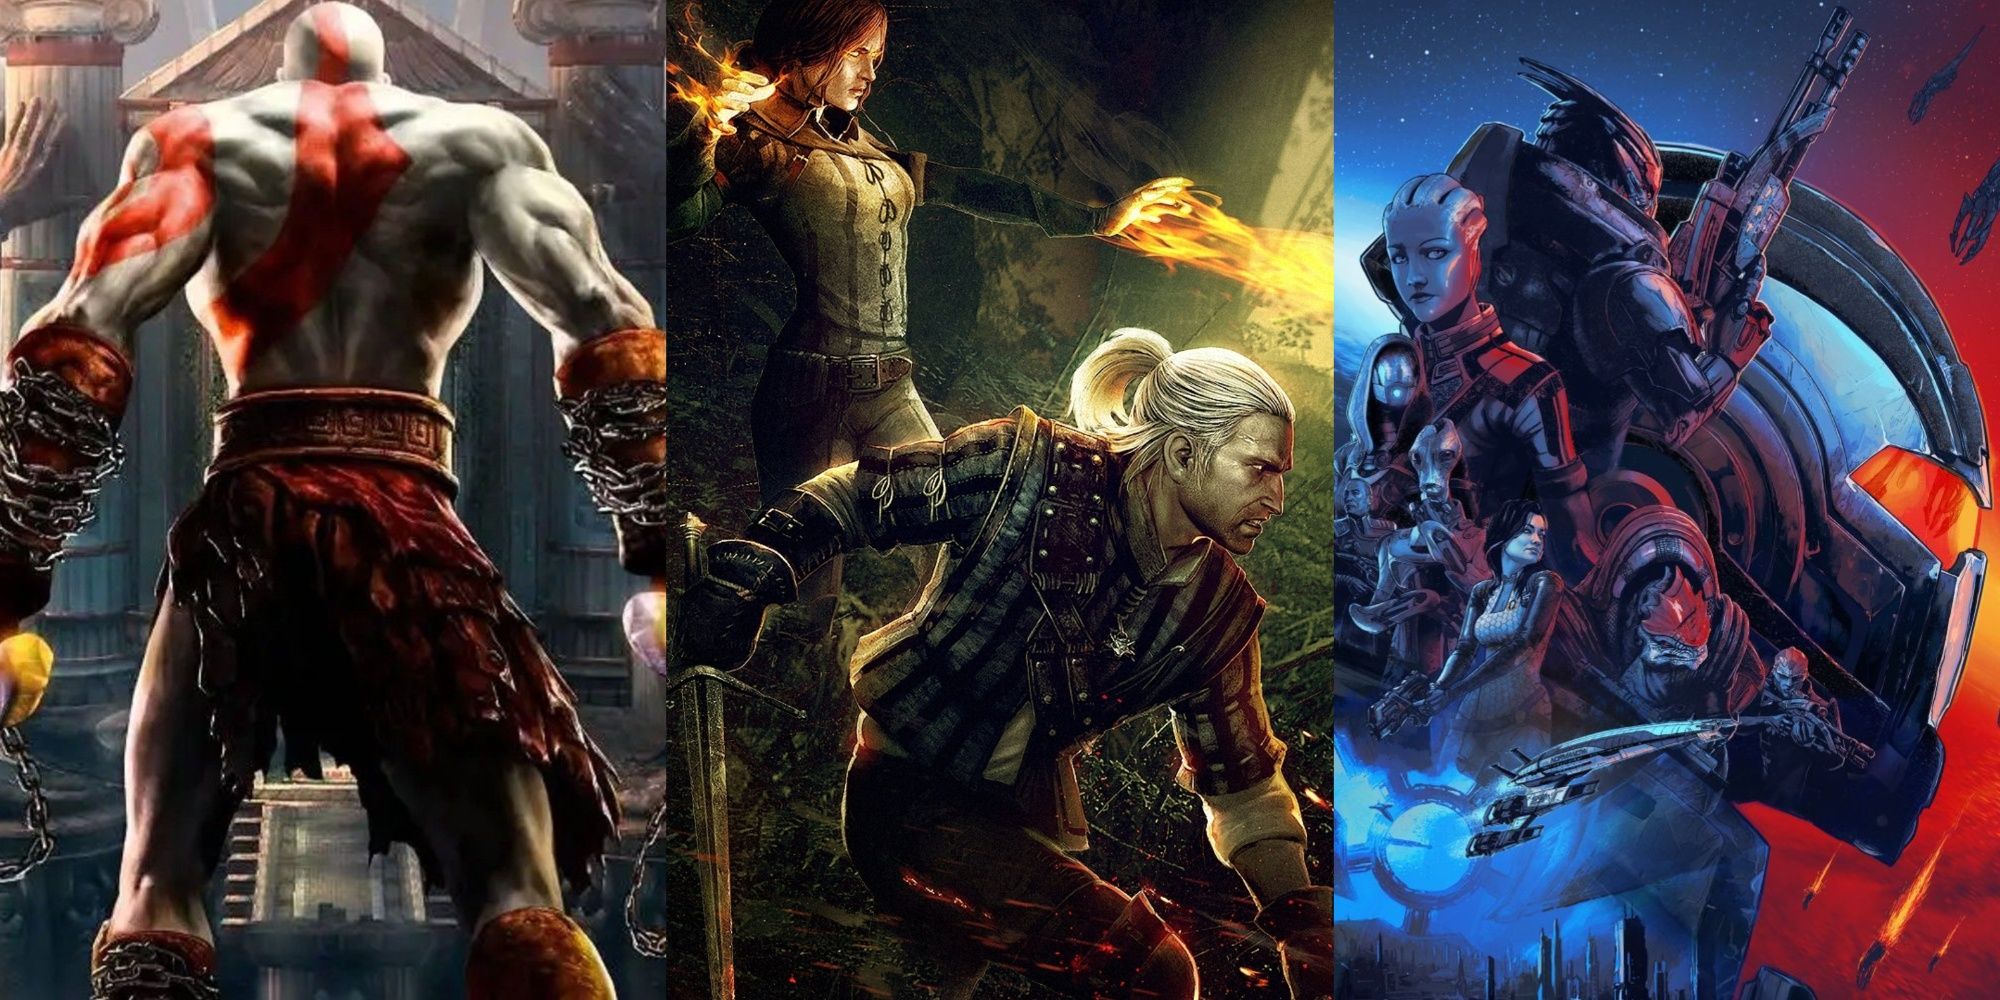 A collage showing the box art for God of War 2, Mass Effect Legendary Edition, and key art for The Witcher 2.